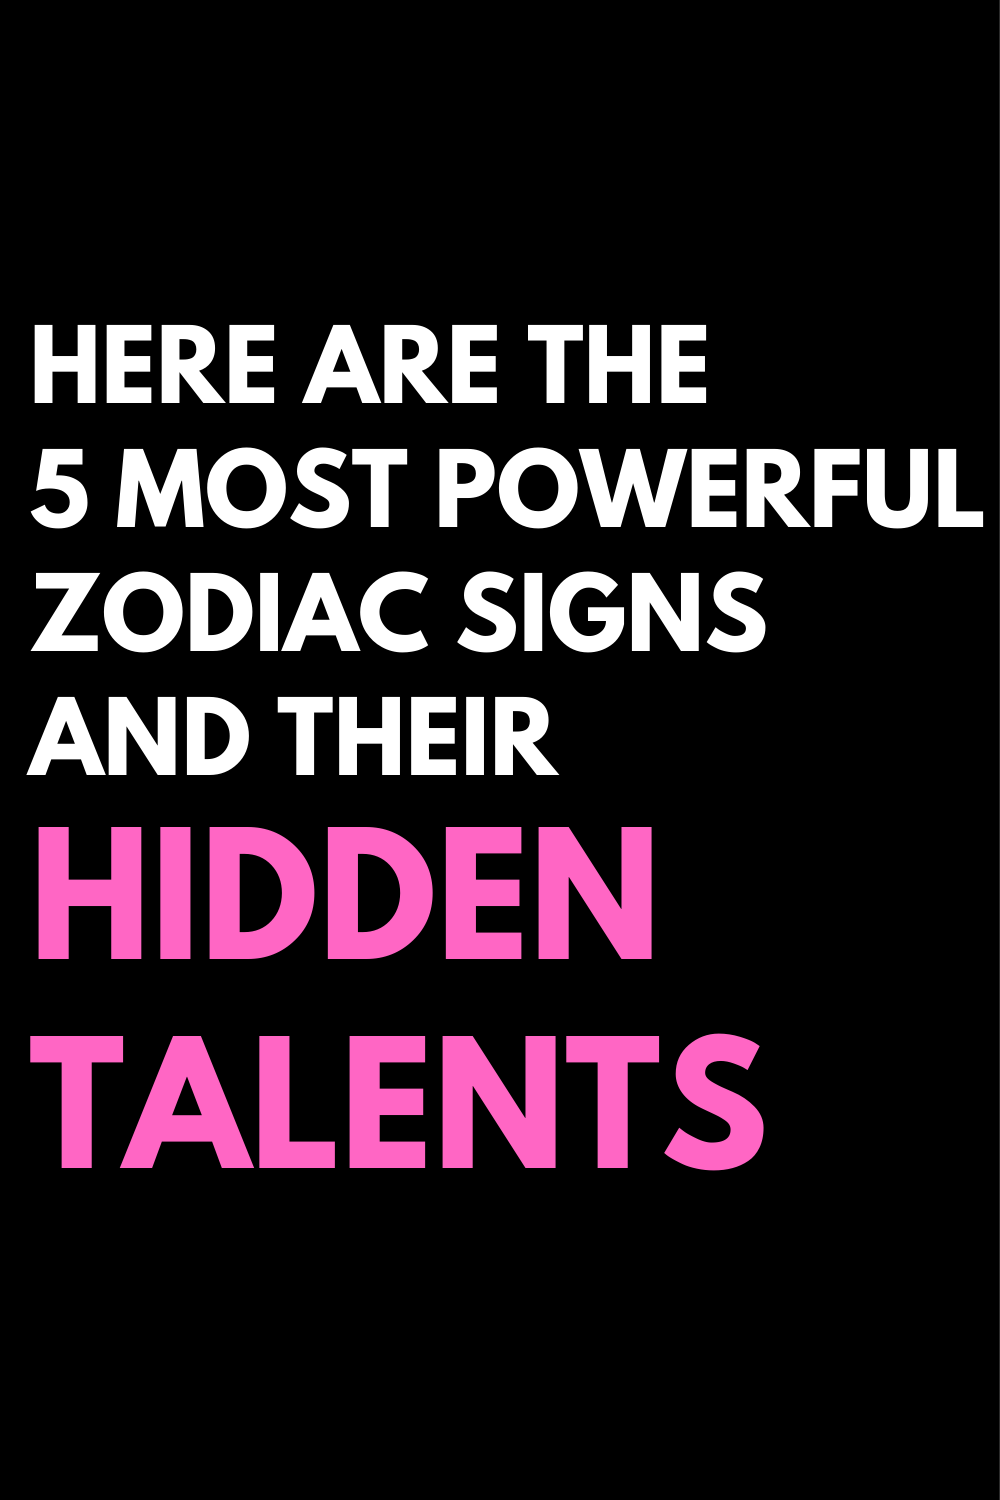 Here Are The 5 Most Powerful Zodiac Signs And Their Hidden Talents